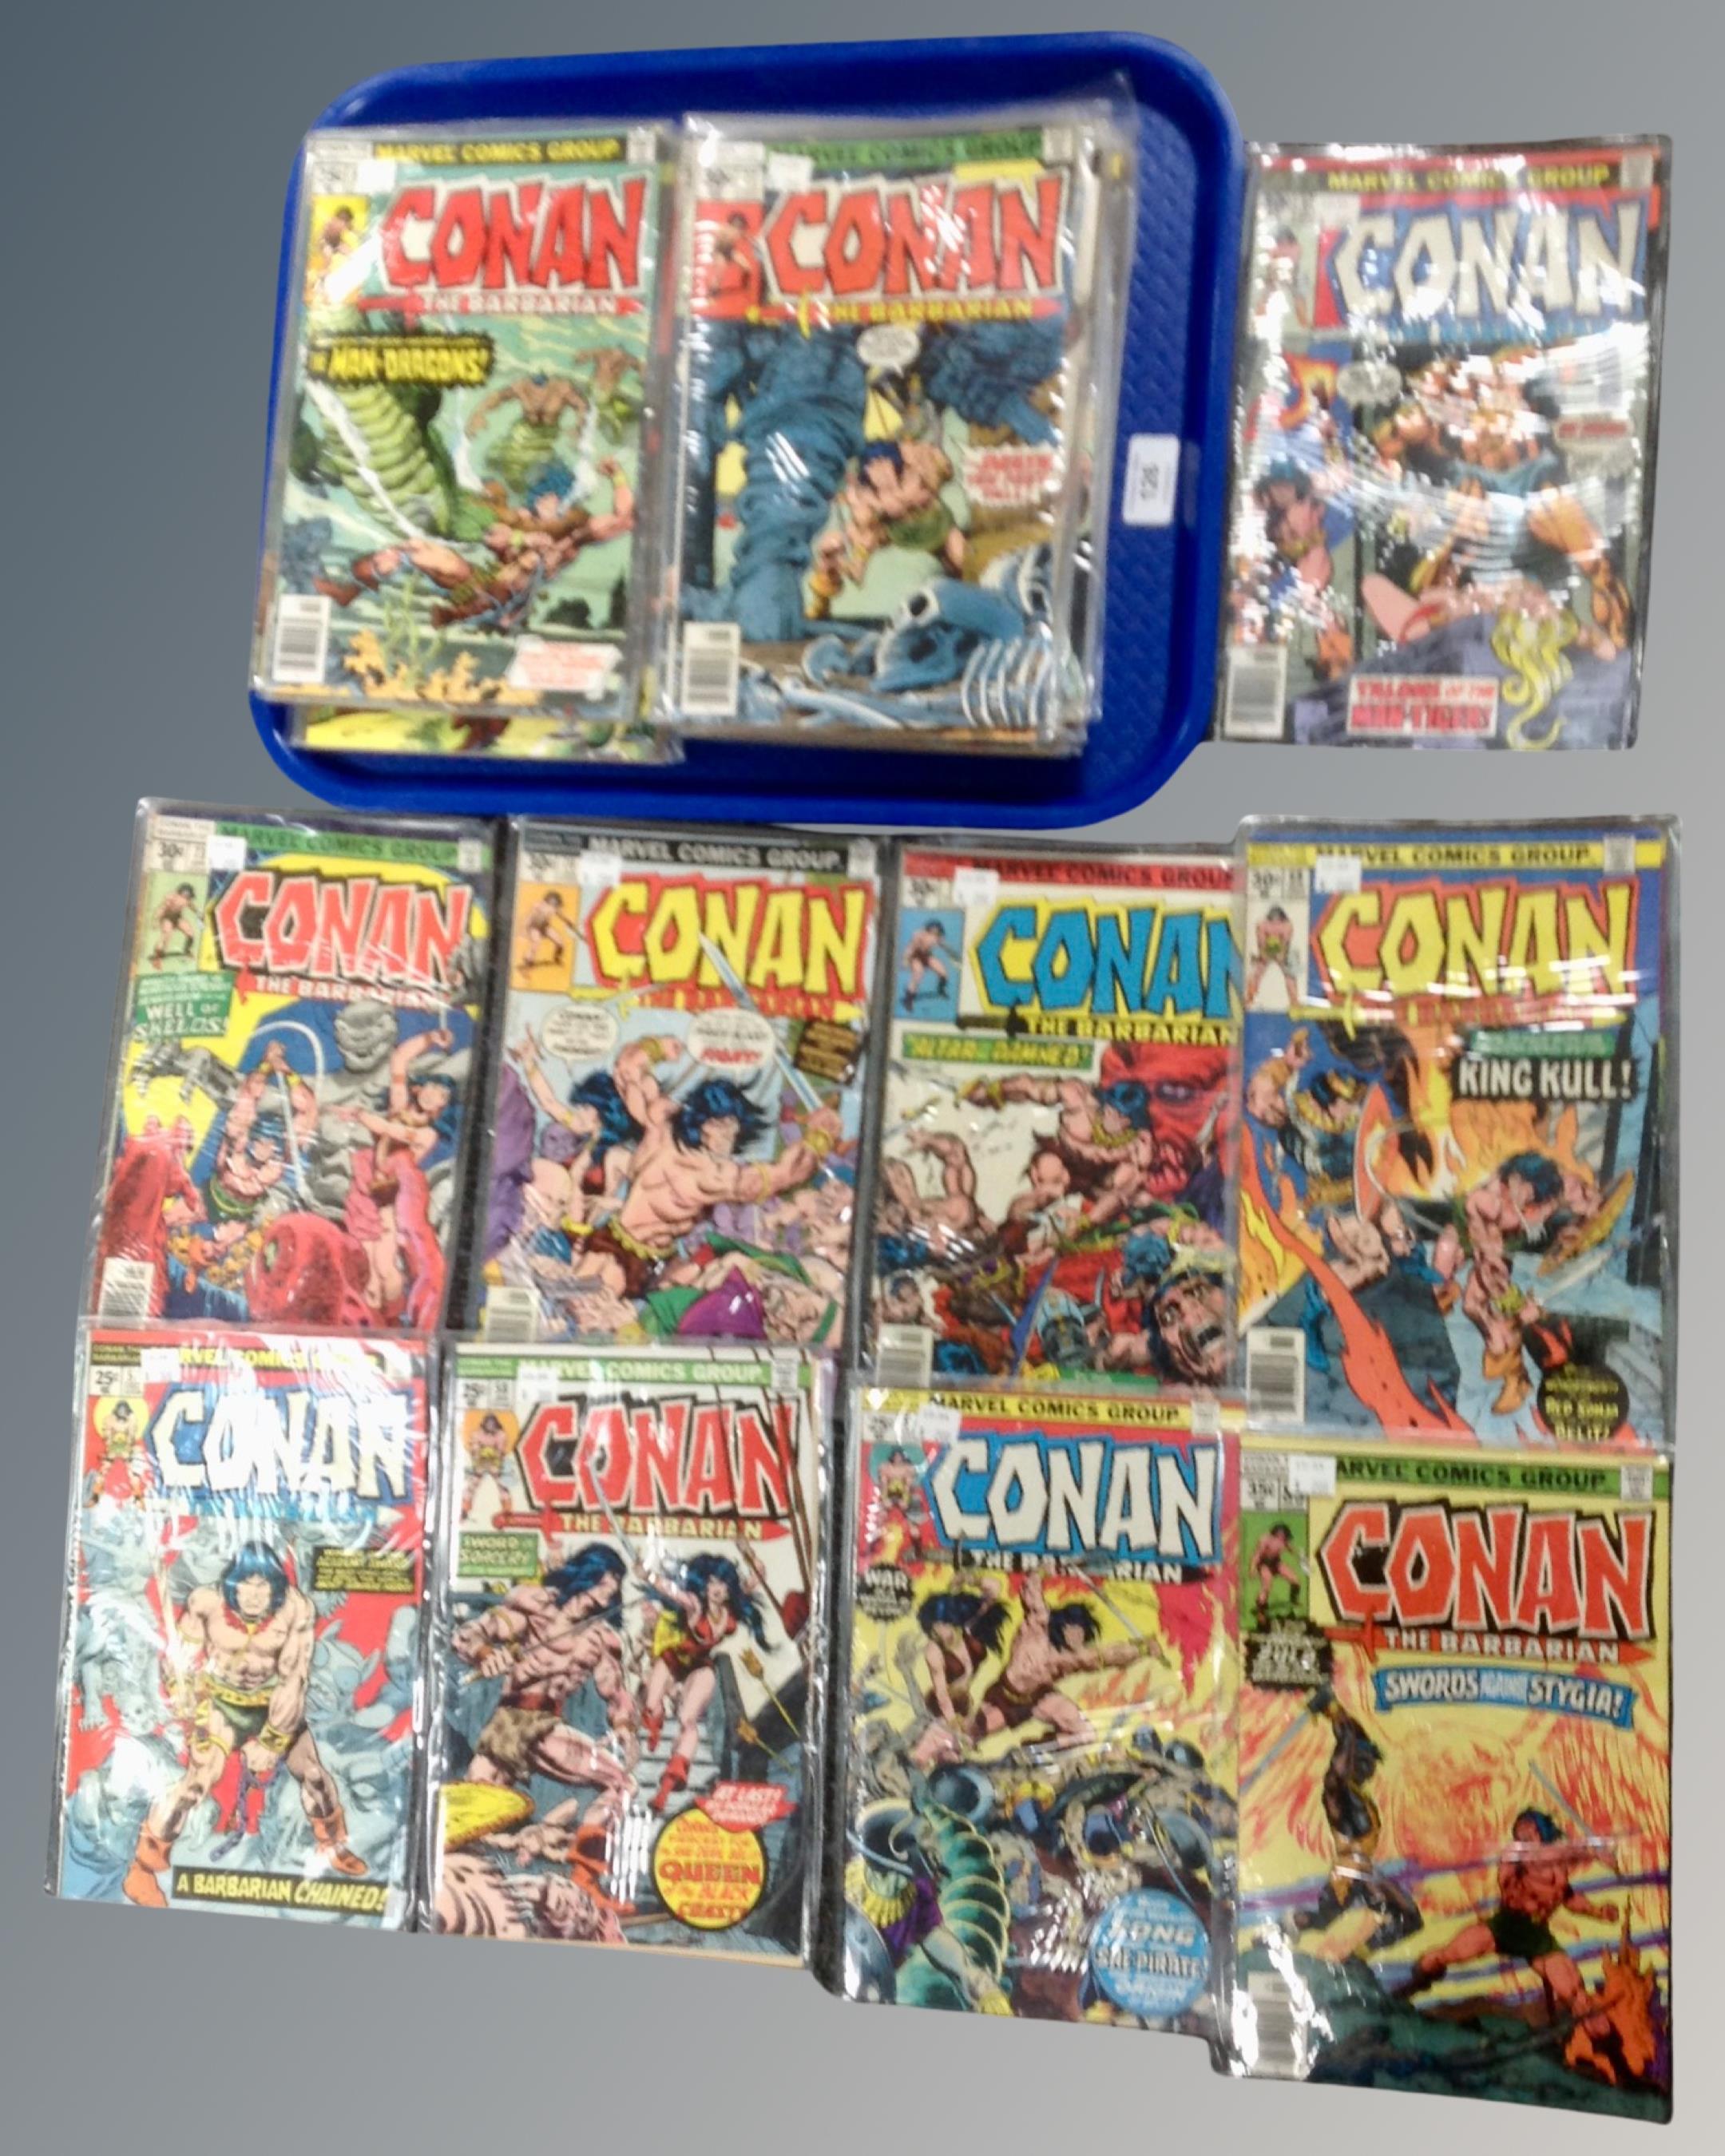 Forty-five 20th century Marvel comics Conan the Barbarian.